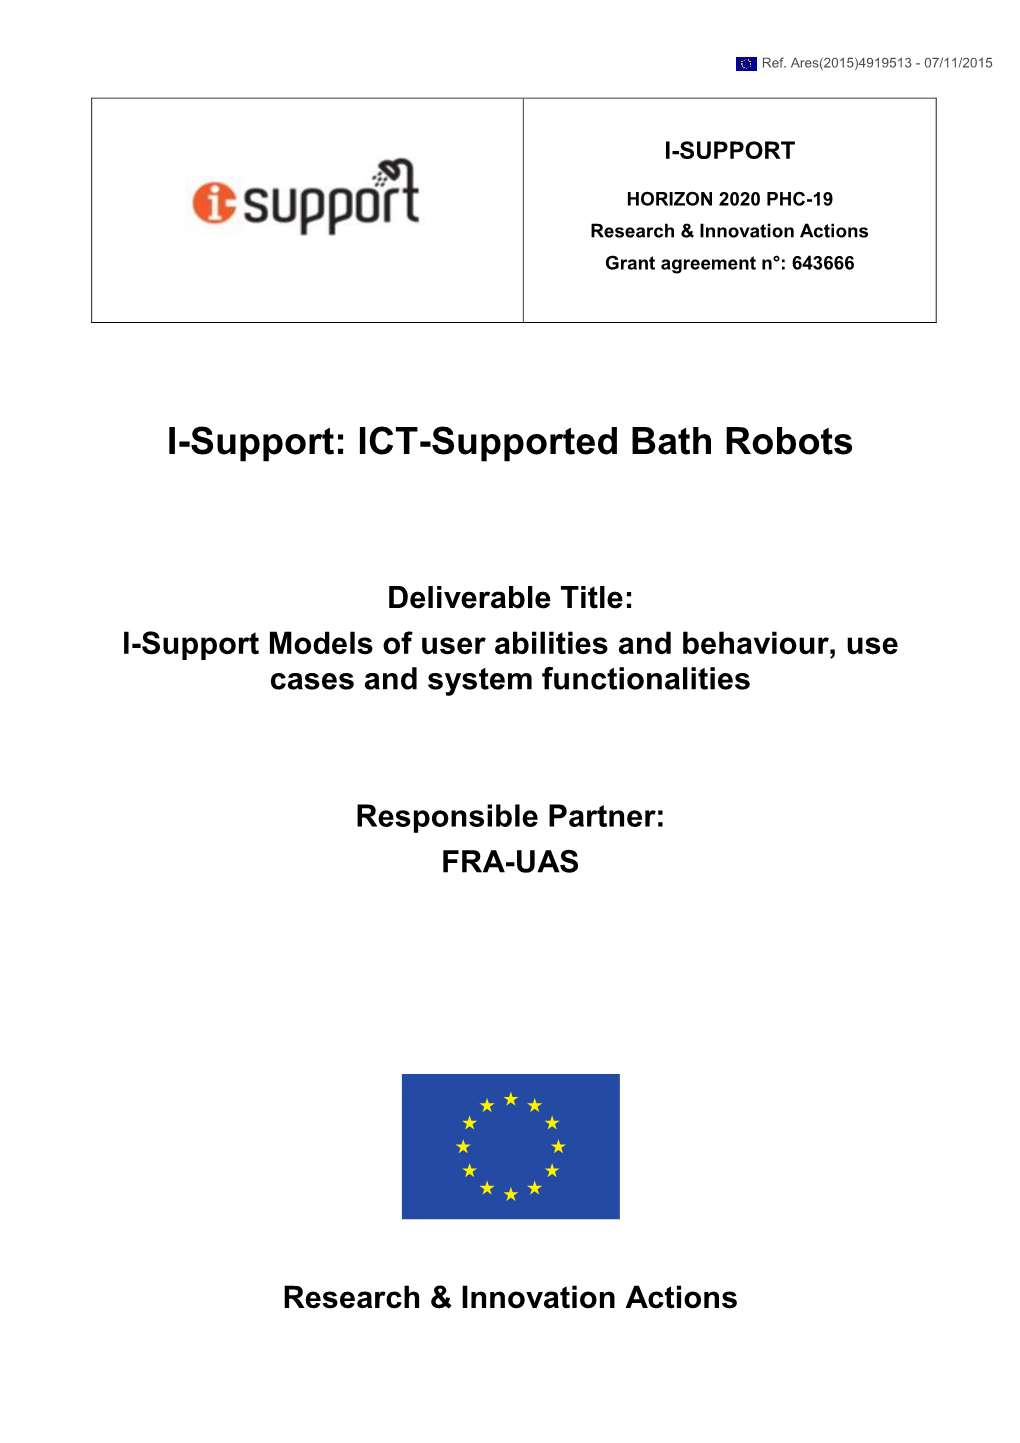 ICT-Supported Bath Robots